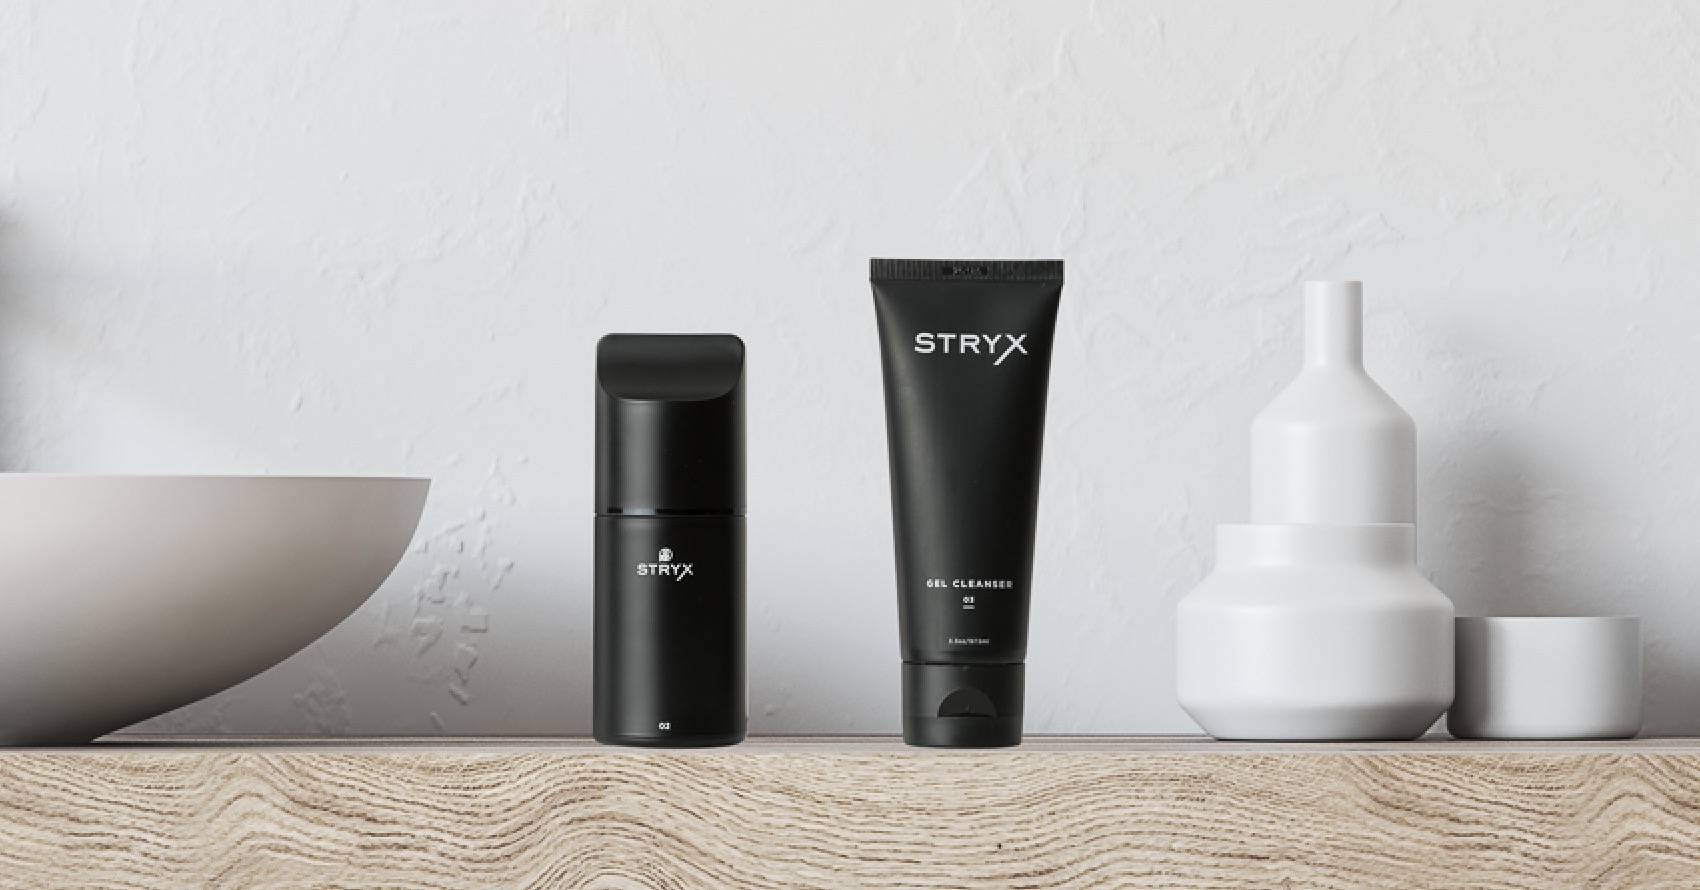 Stryx products